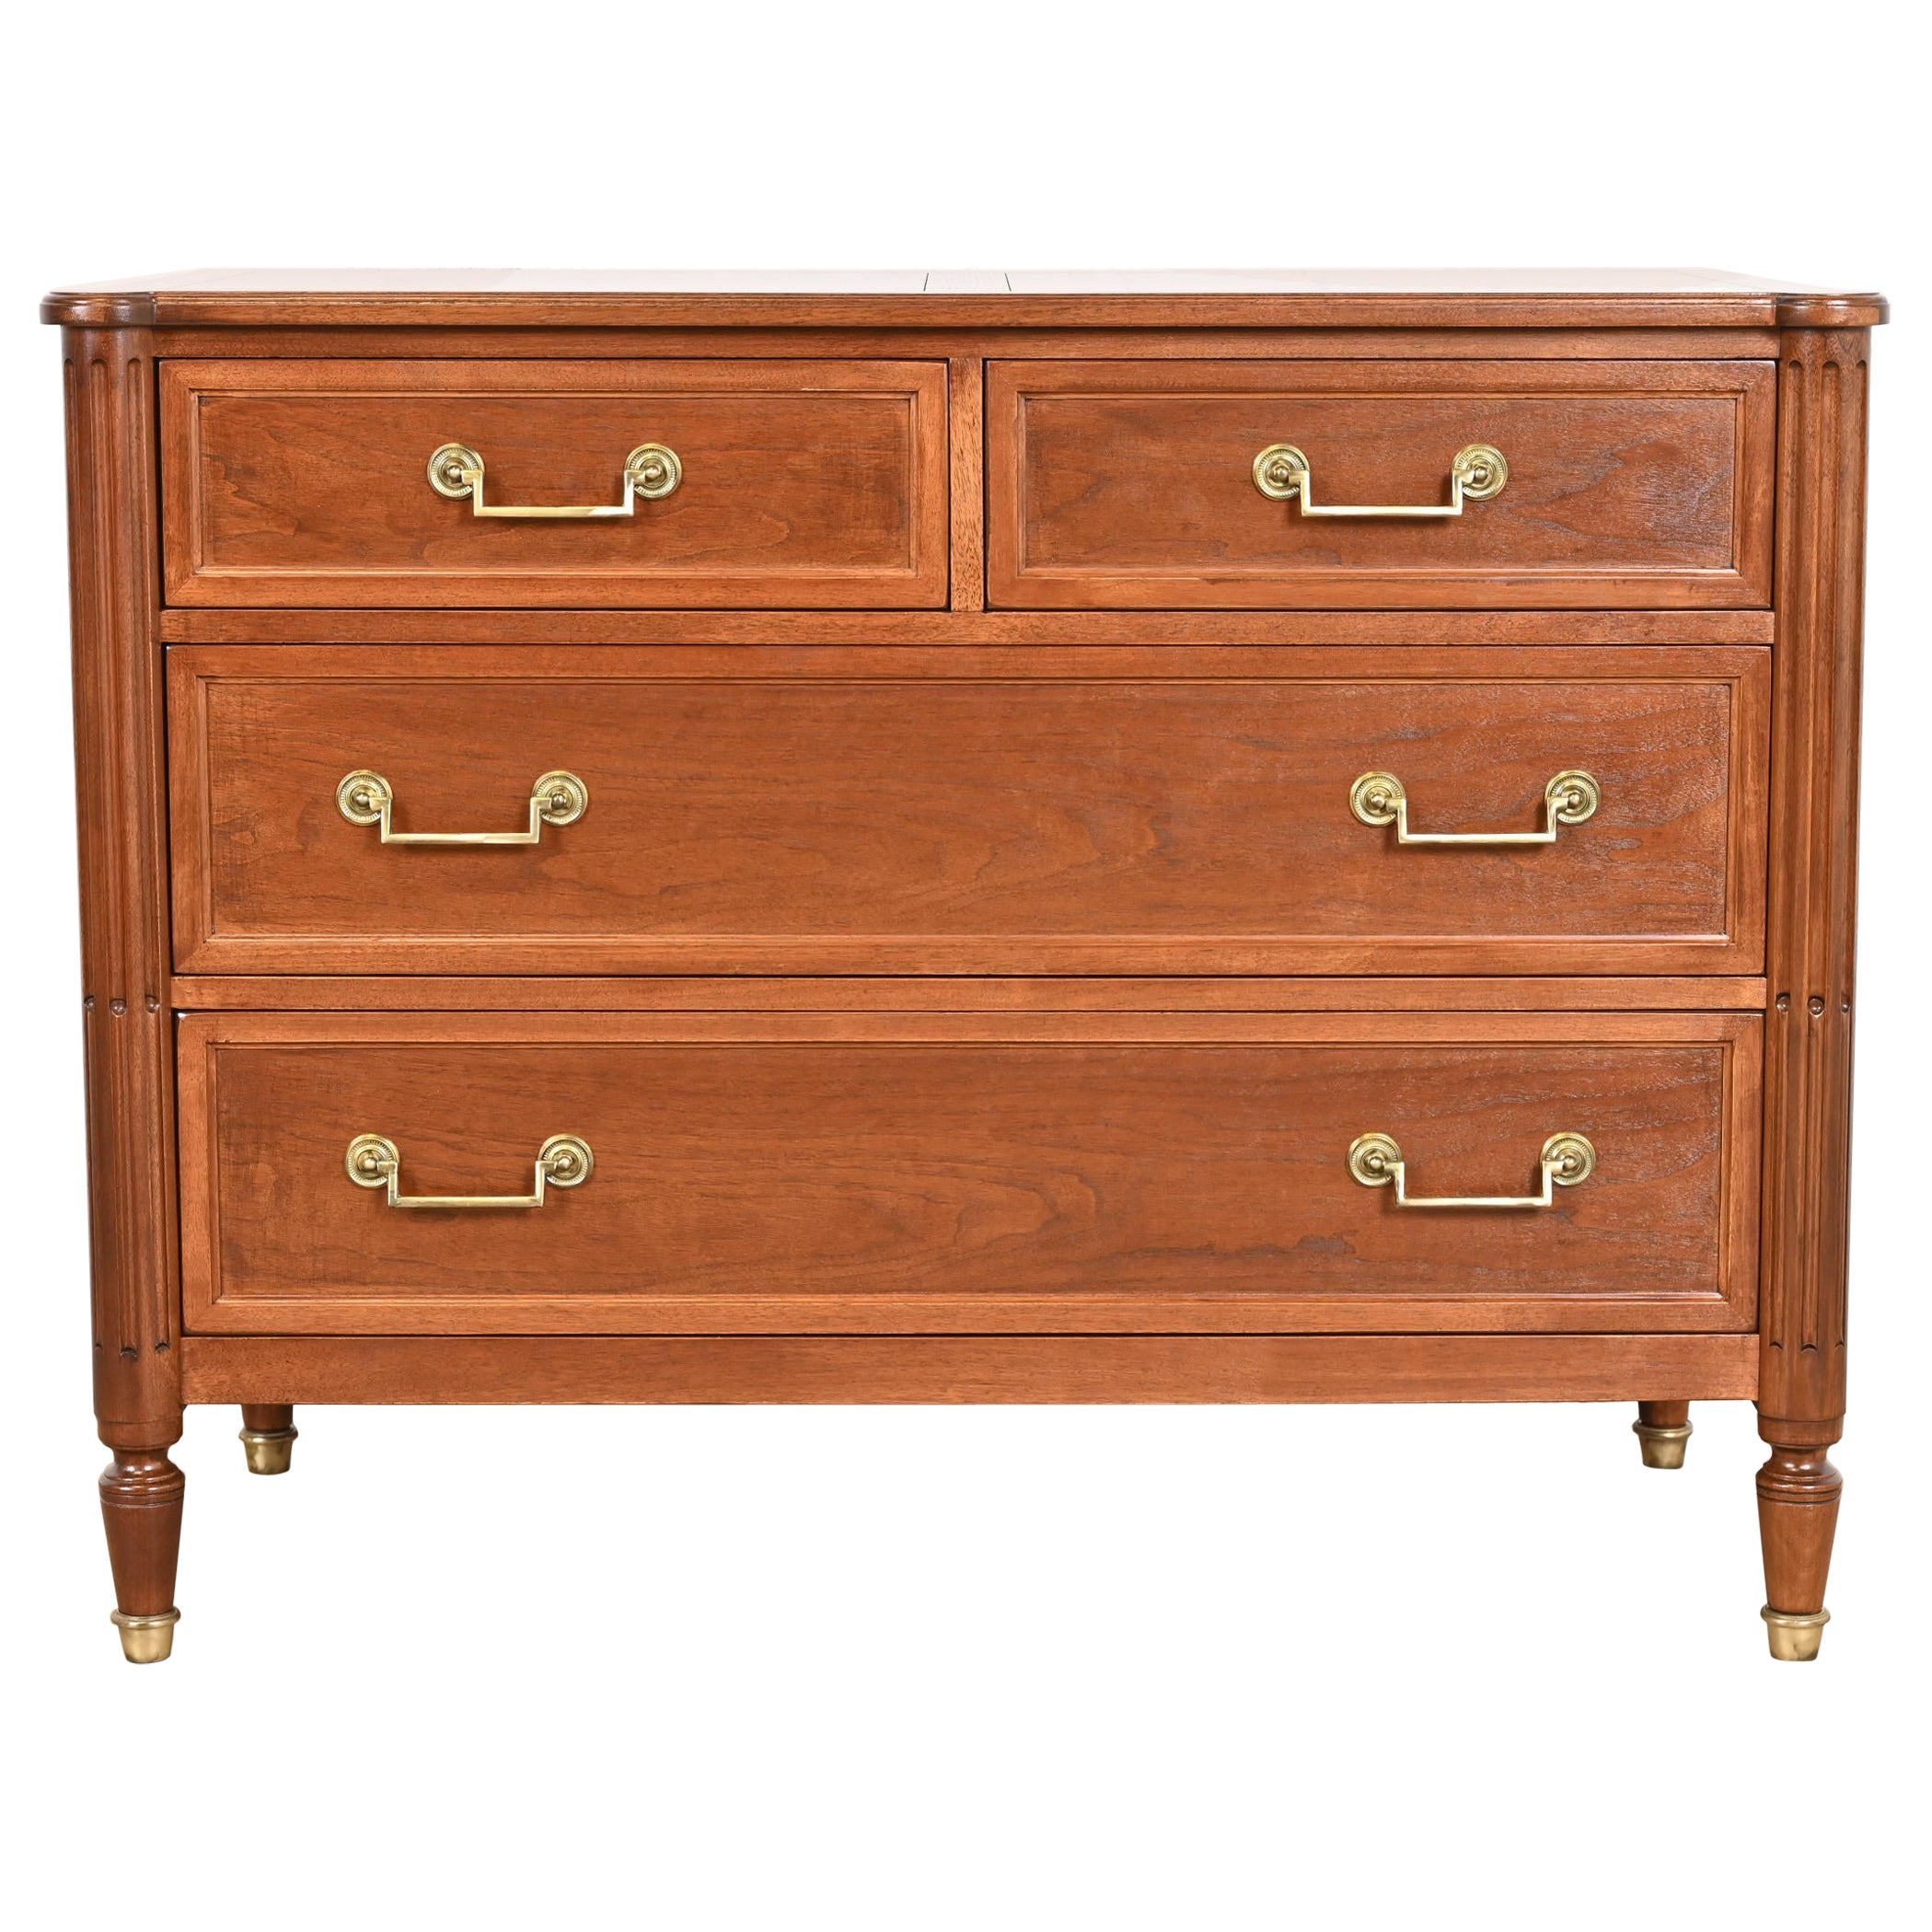 Baker Furniture French Regency Louis XVI Walnut Chest of Drawers, Refinished